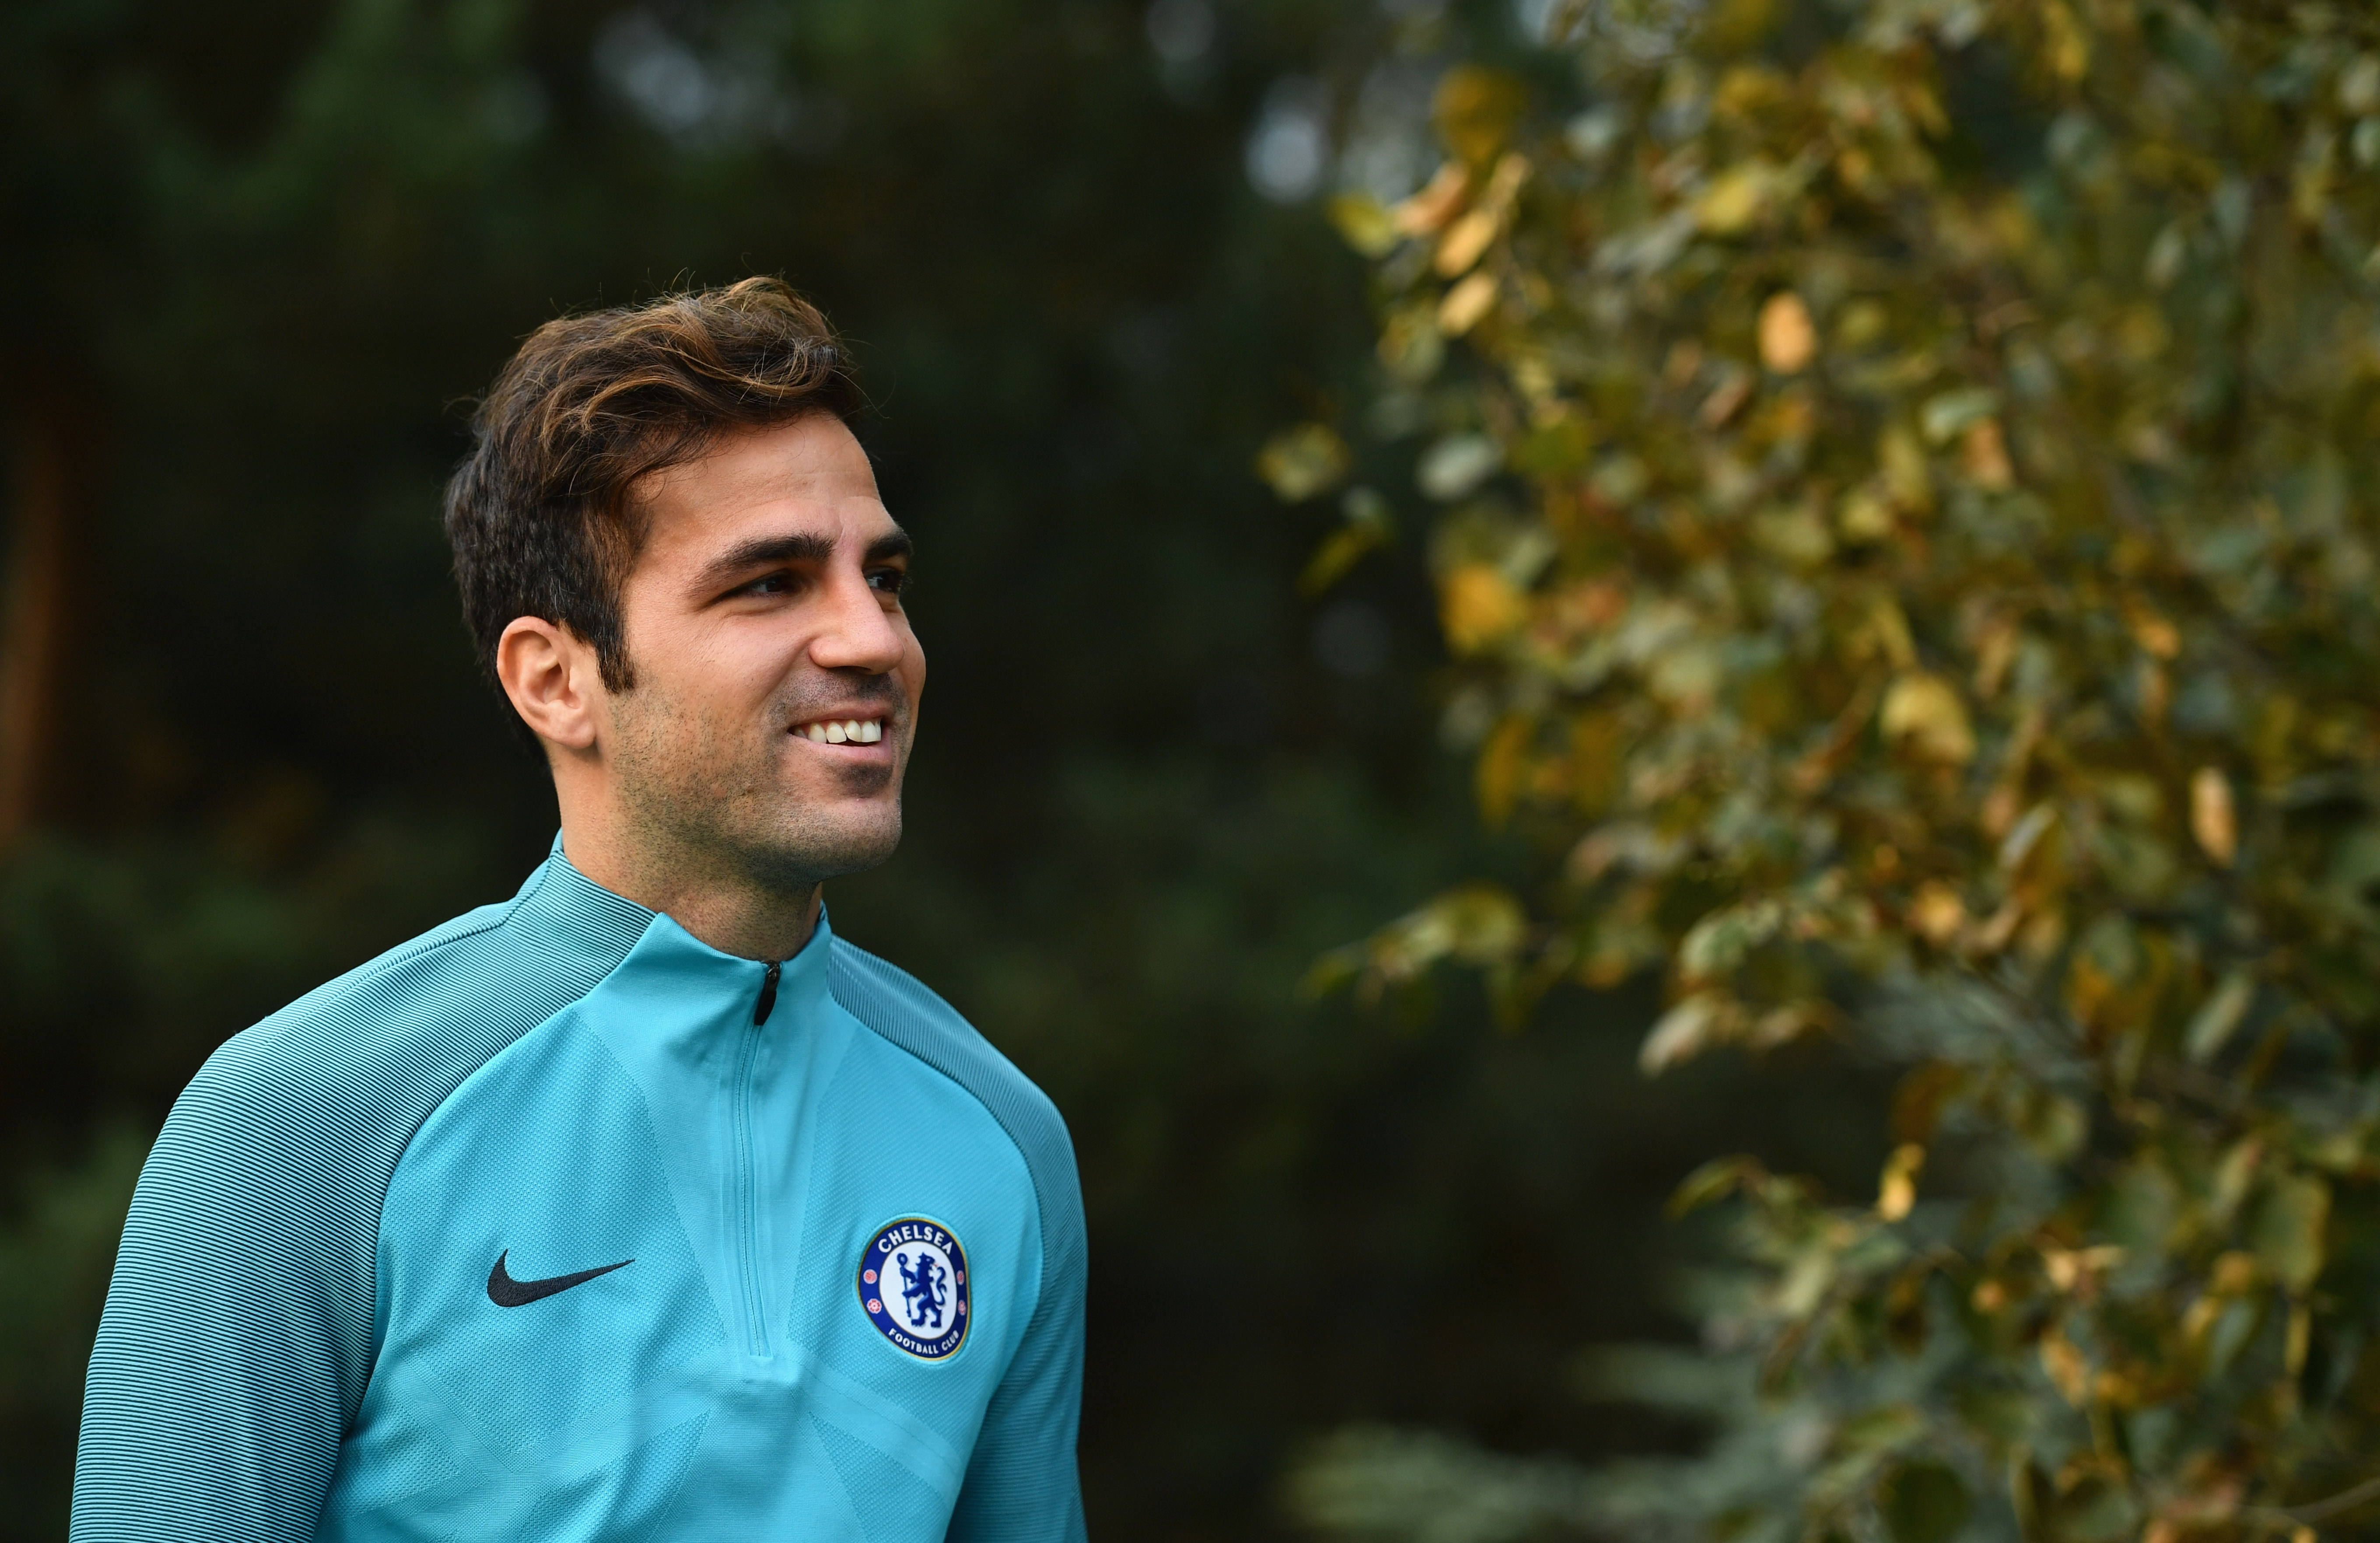 COBHAM, ENGLAND - OCTOBER 17:  Cesc Fabregas looks on during a Chelsea training session on the eve of their UEFA Champions League match against AS Roma at Chelsea Training Ground on October 17, 2017 in Cobham, England.  (Photo by Dan Mullan/Getty Images)